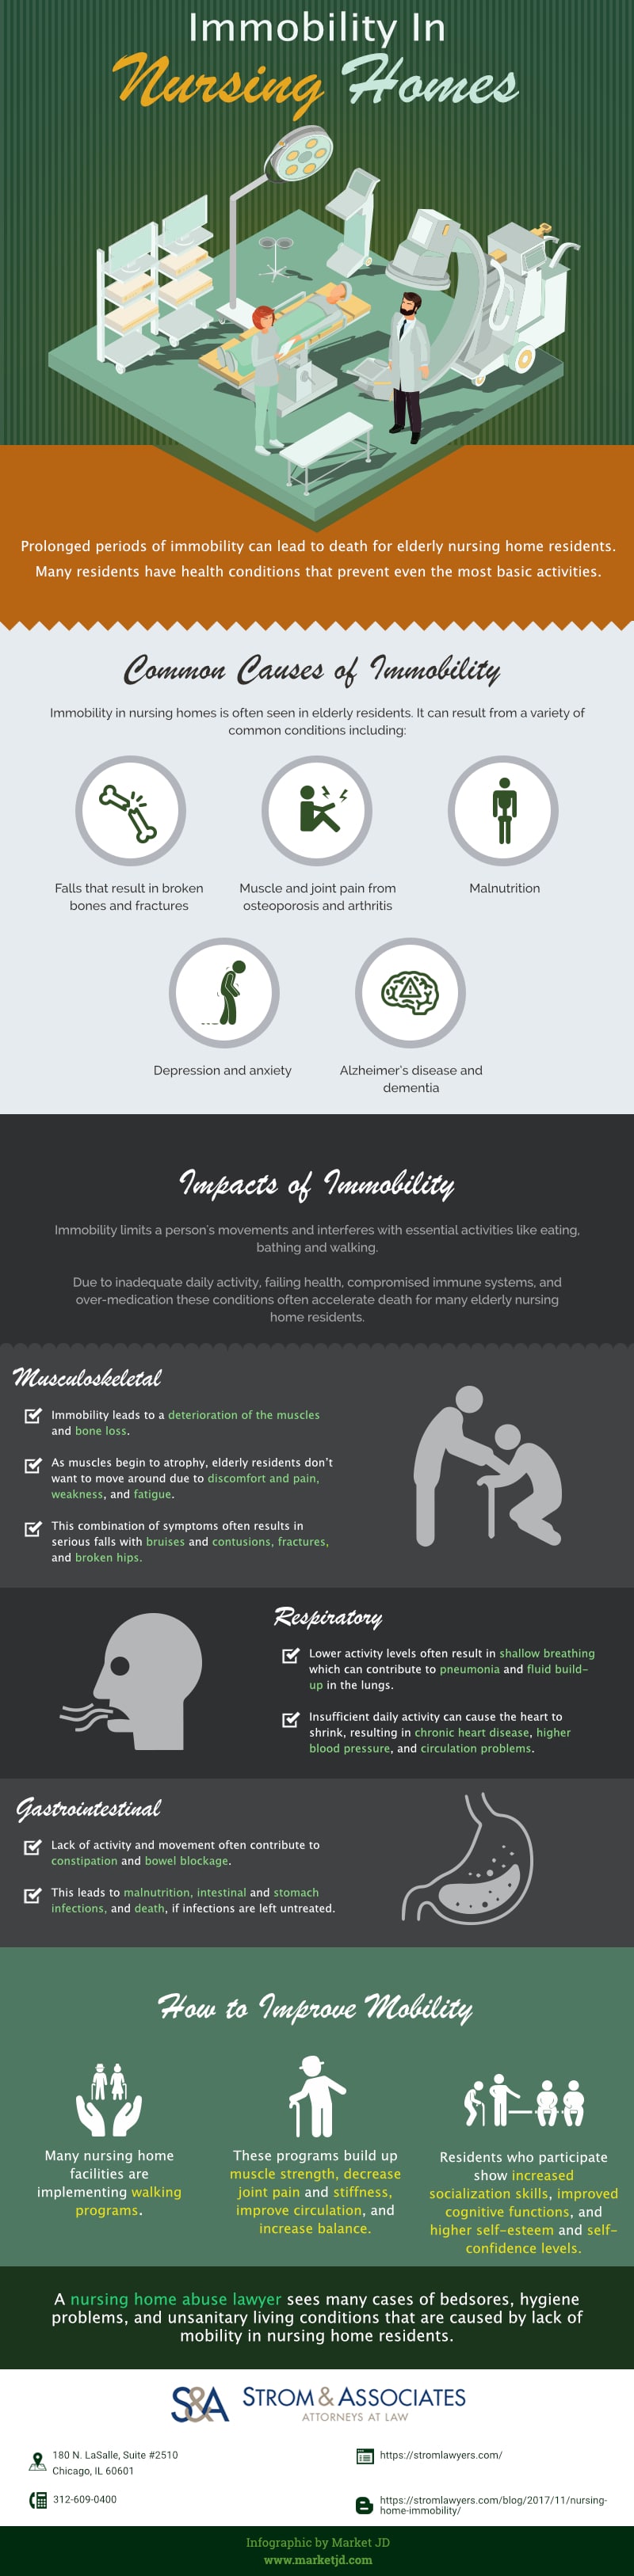 Immobility on Nursing Home infographic